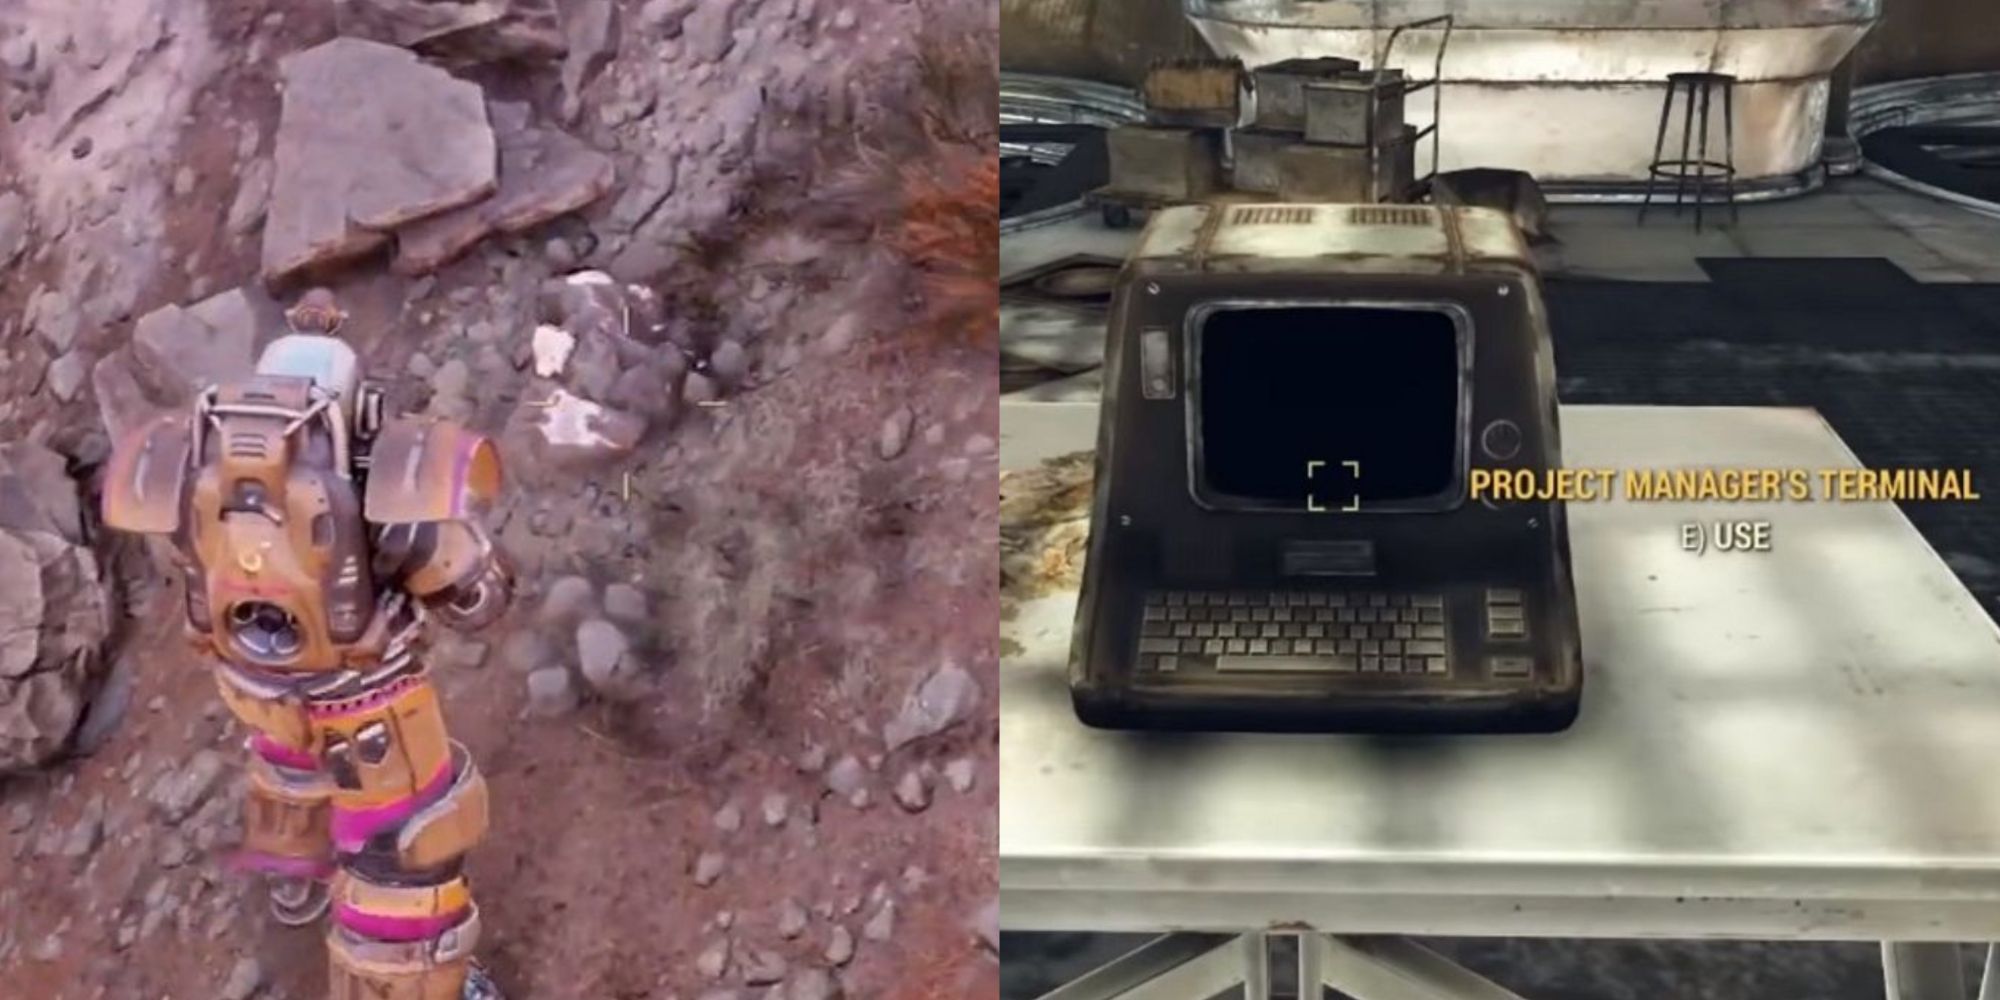 Split image screenshots of a player mining and interacting with the Project Manager's Terminal in Fallout 76.